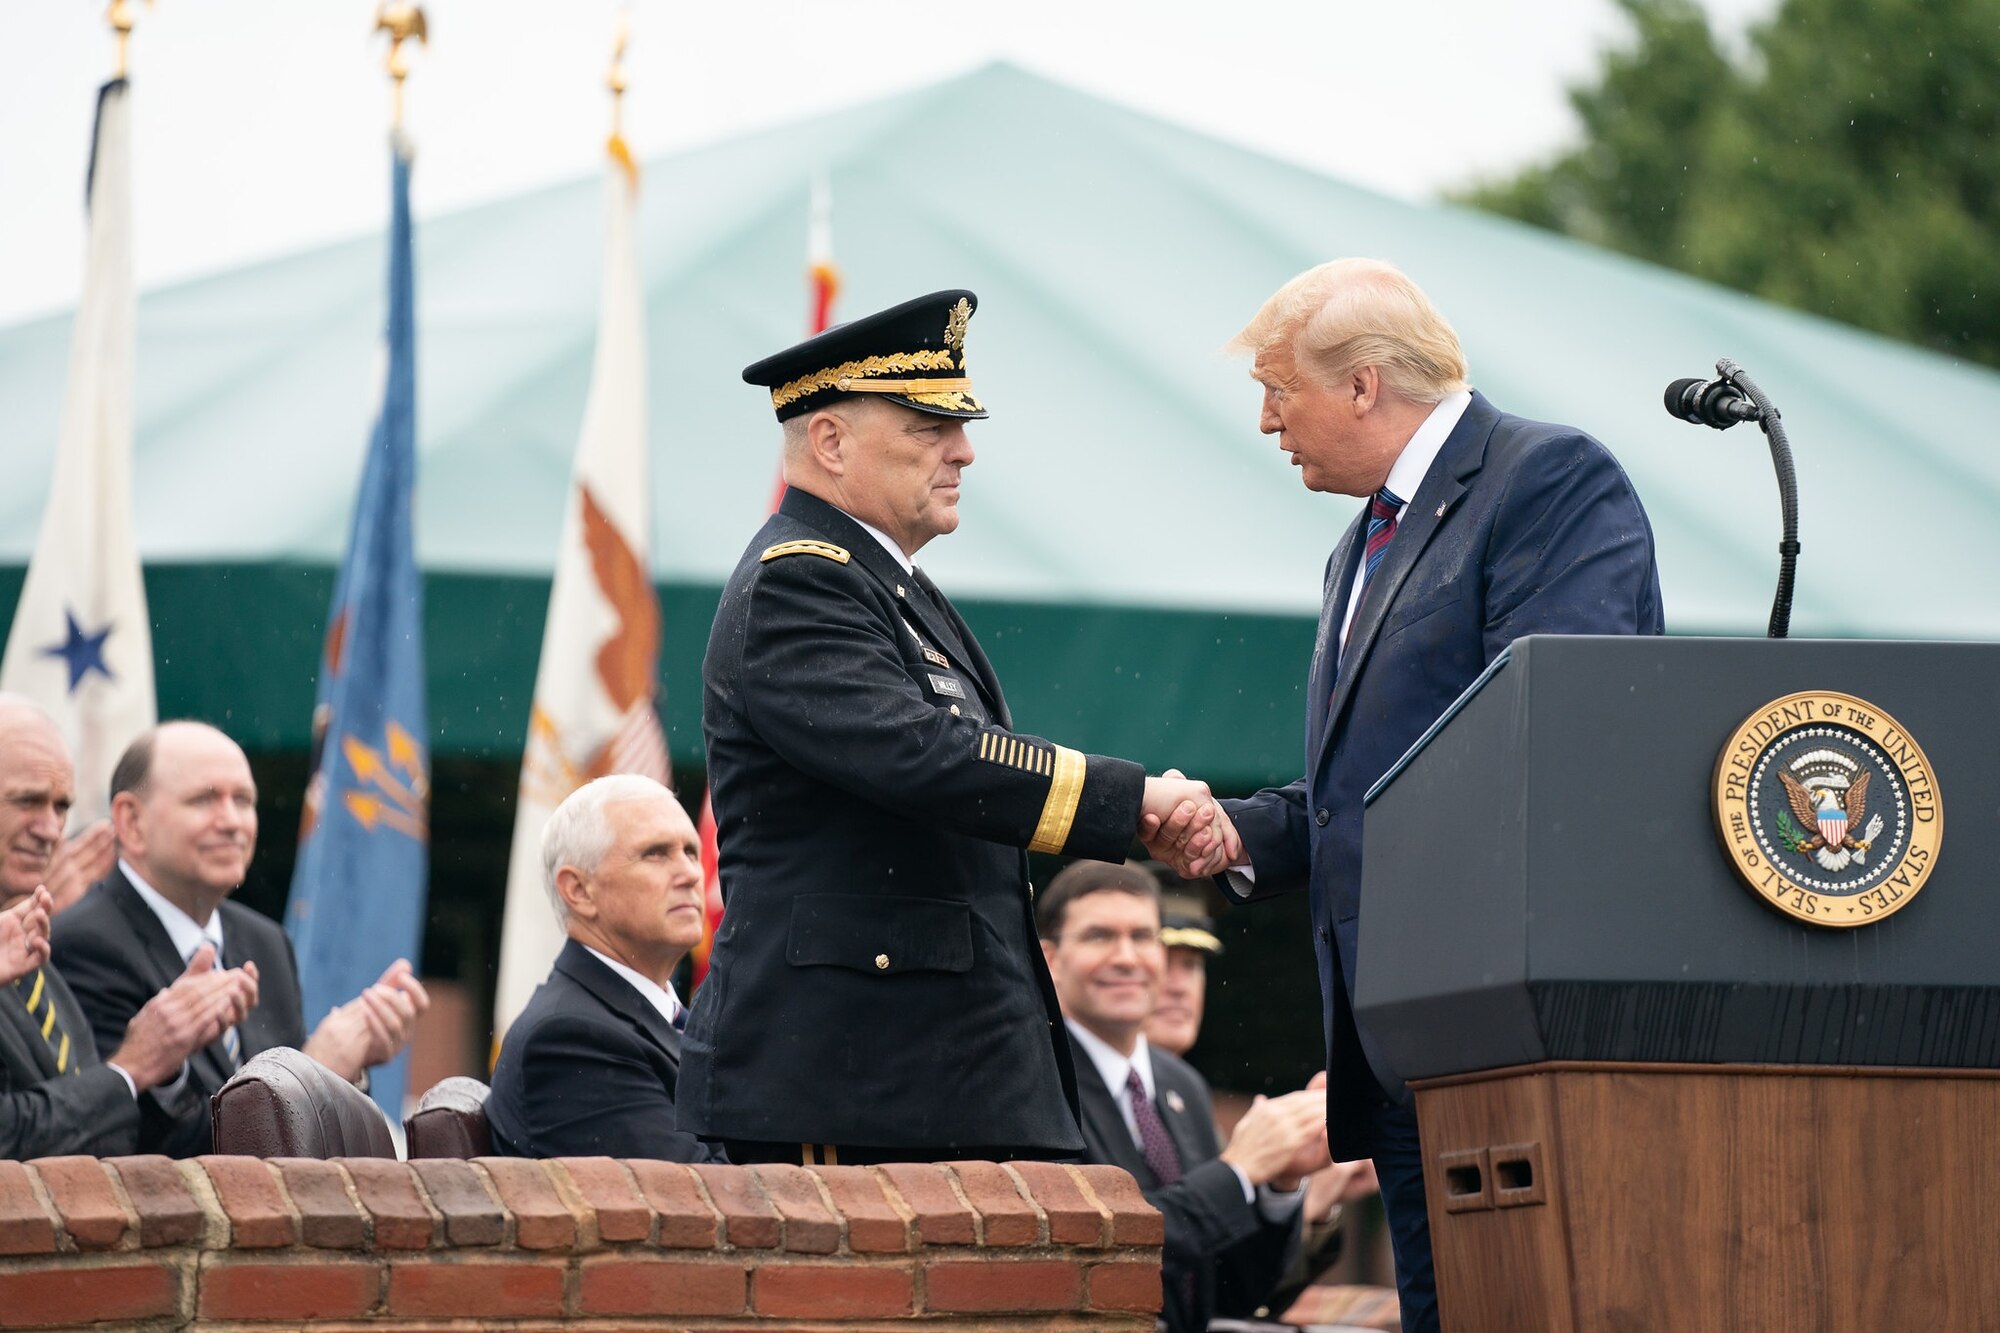 President Donald J. Trump shakes hands with Army Gen. Mark A. Milley upon the latter’s assumption of office as the 20th chairman of the Joint Chiefs of Staff during a ceremony at Joint Base Myer-Henderson Hall, Virginia, Sept. 30, 2019.